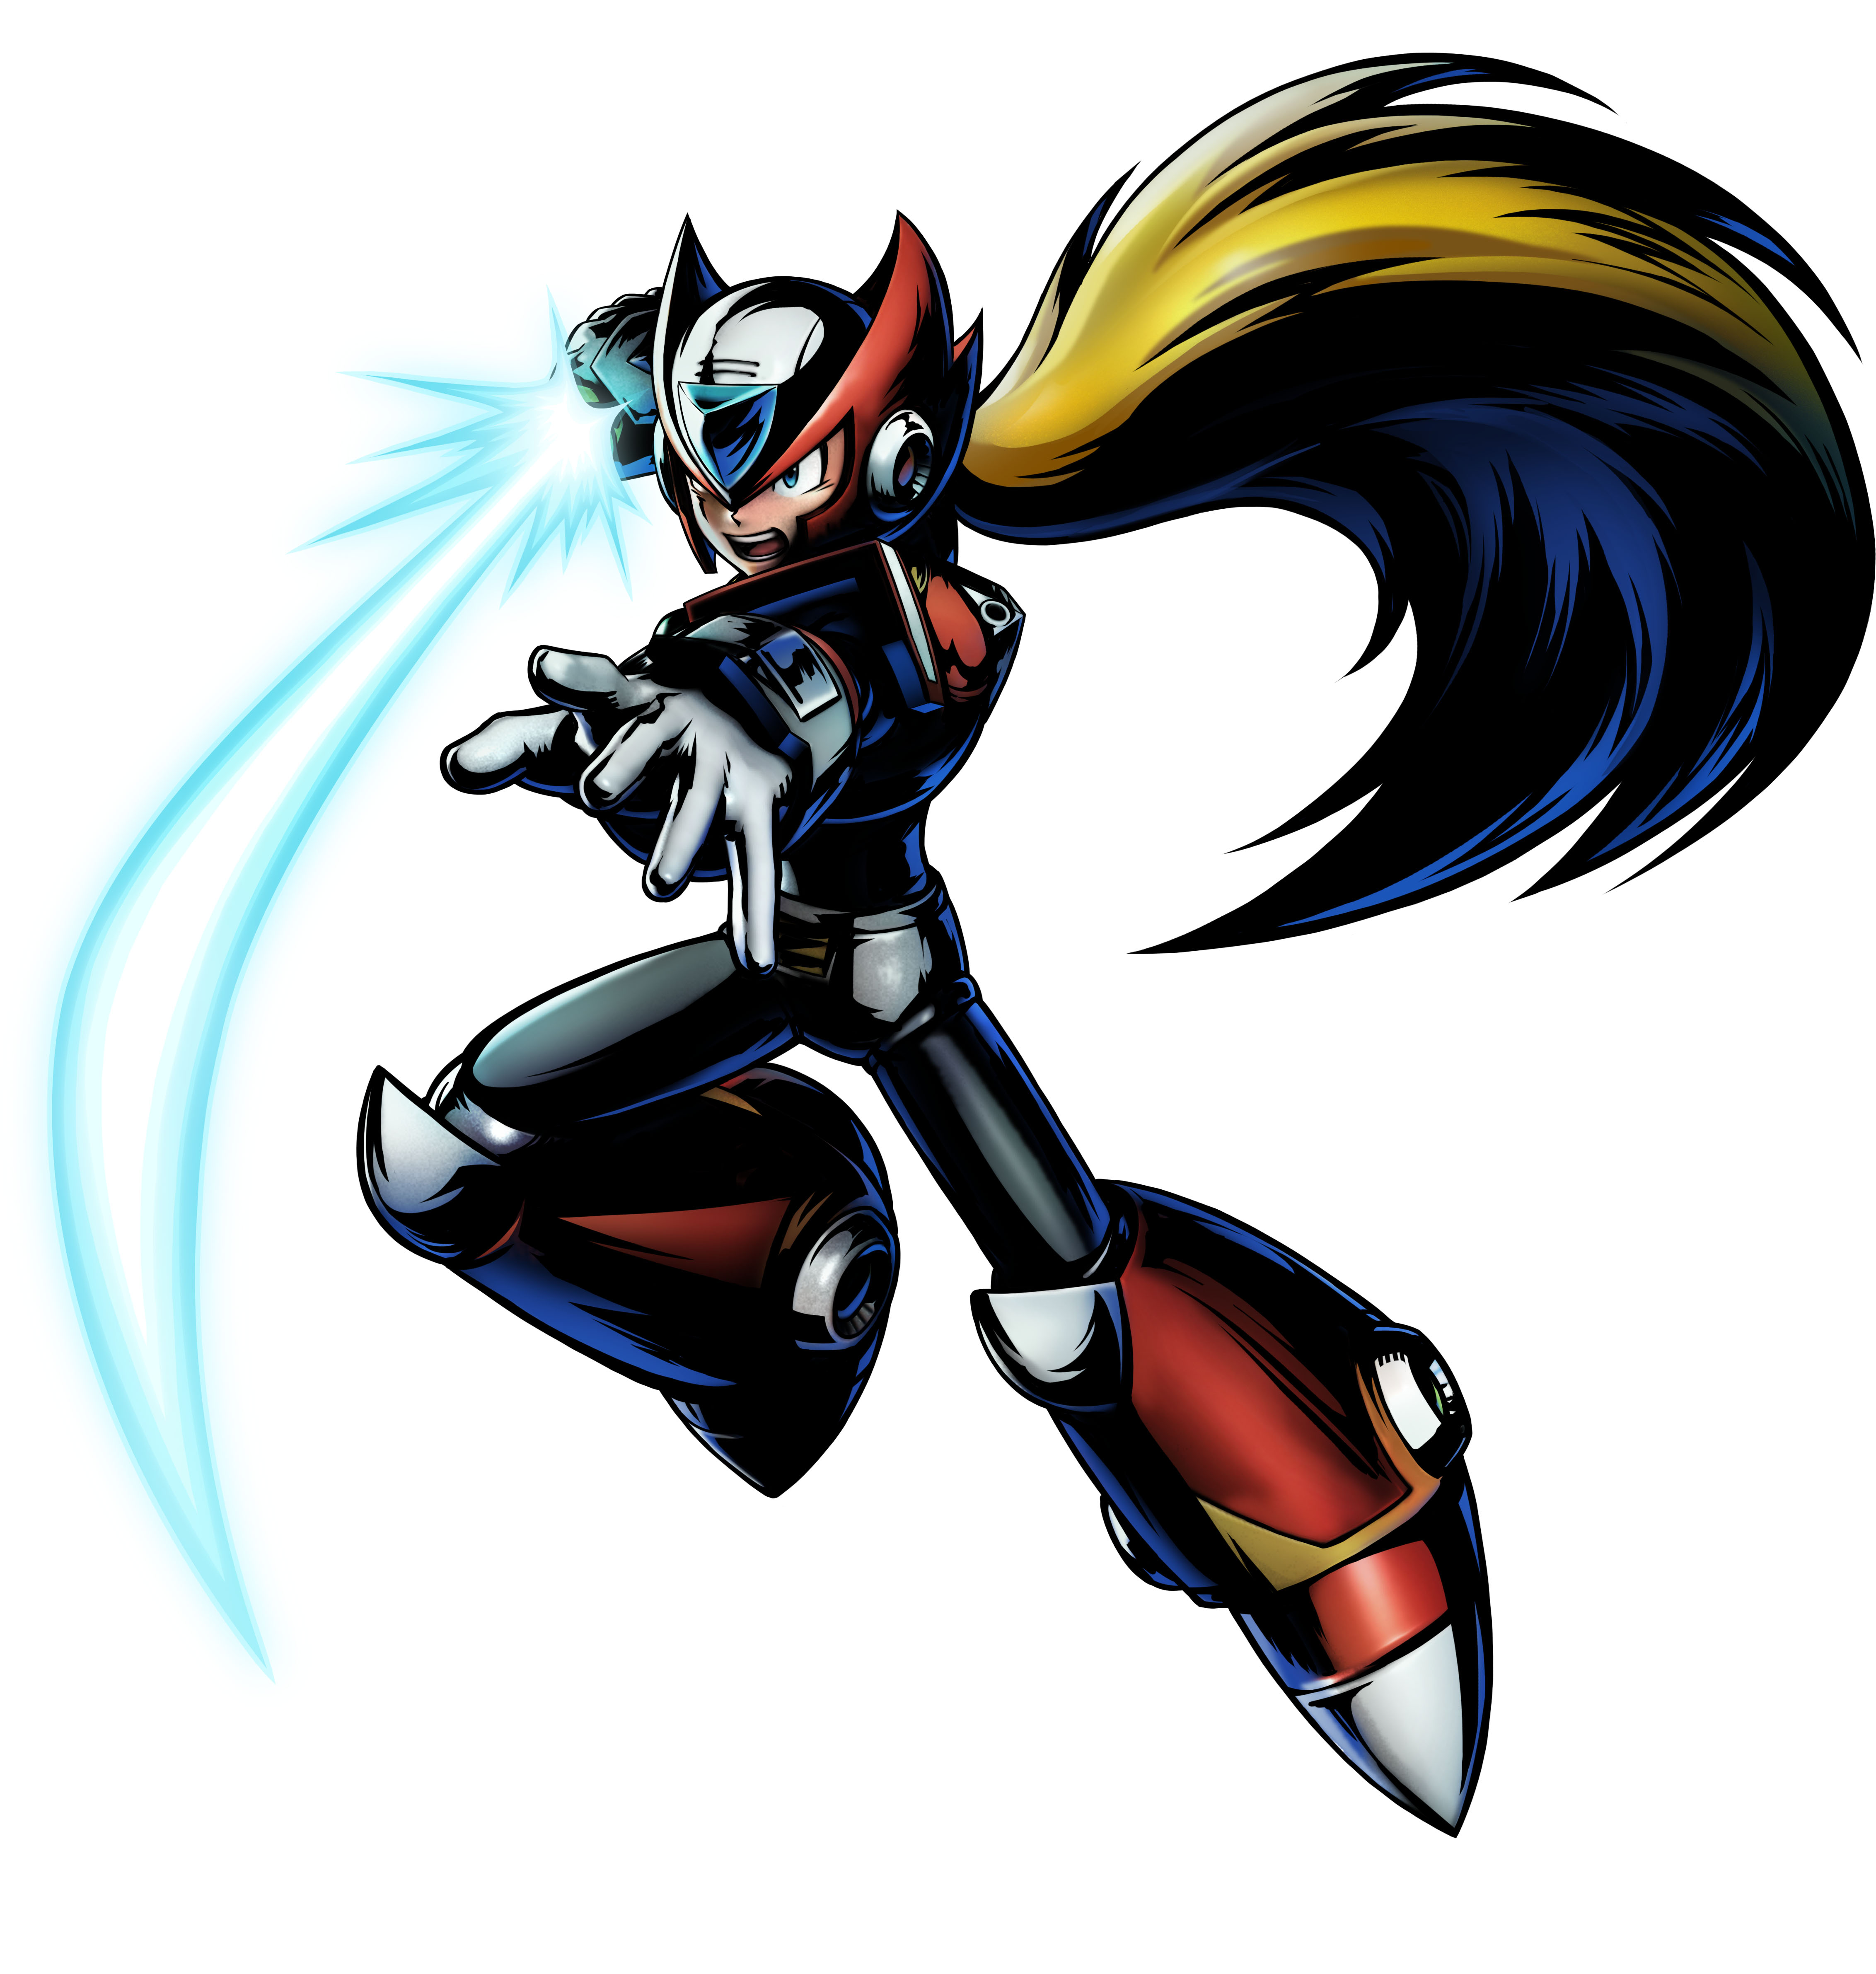 Zero from the MegaMan X Games
